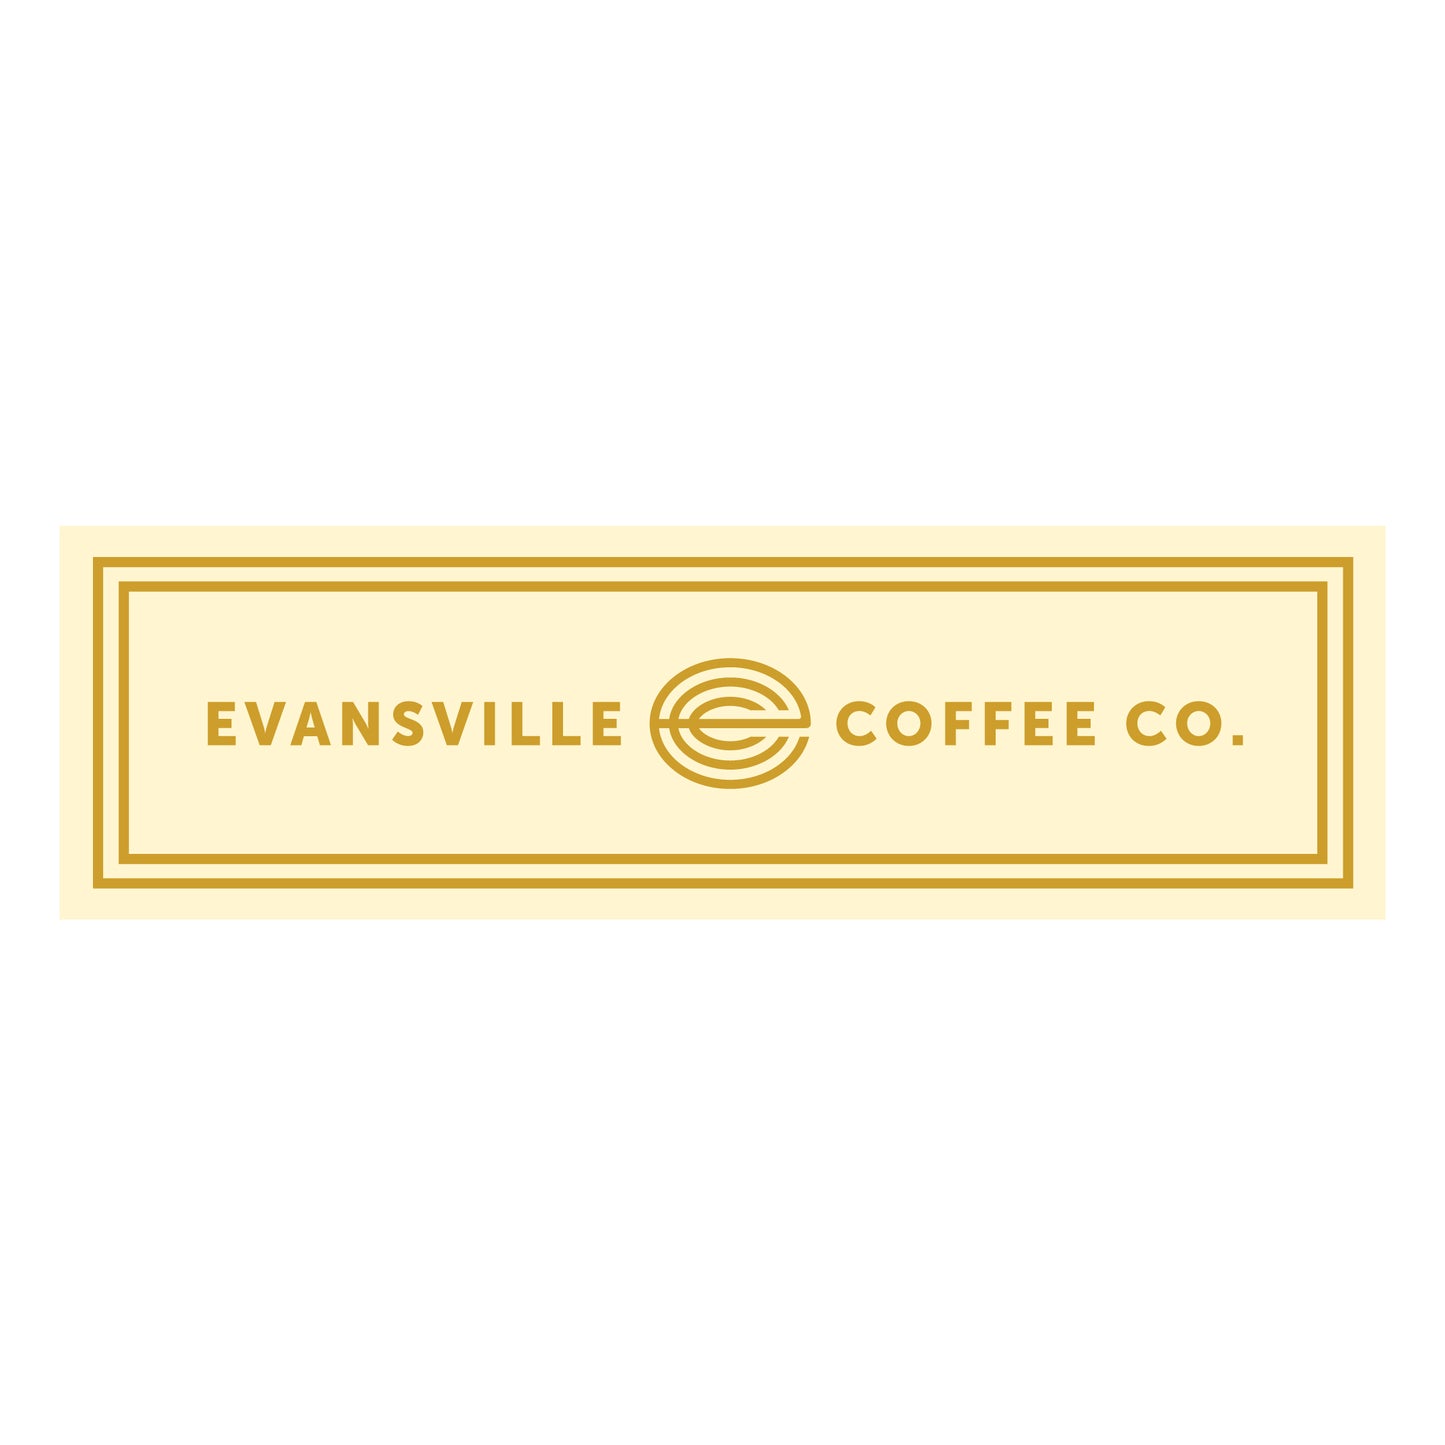 EVANSVILLE COFFEE CO. GIFT CARD